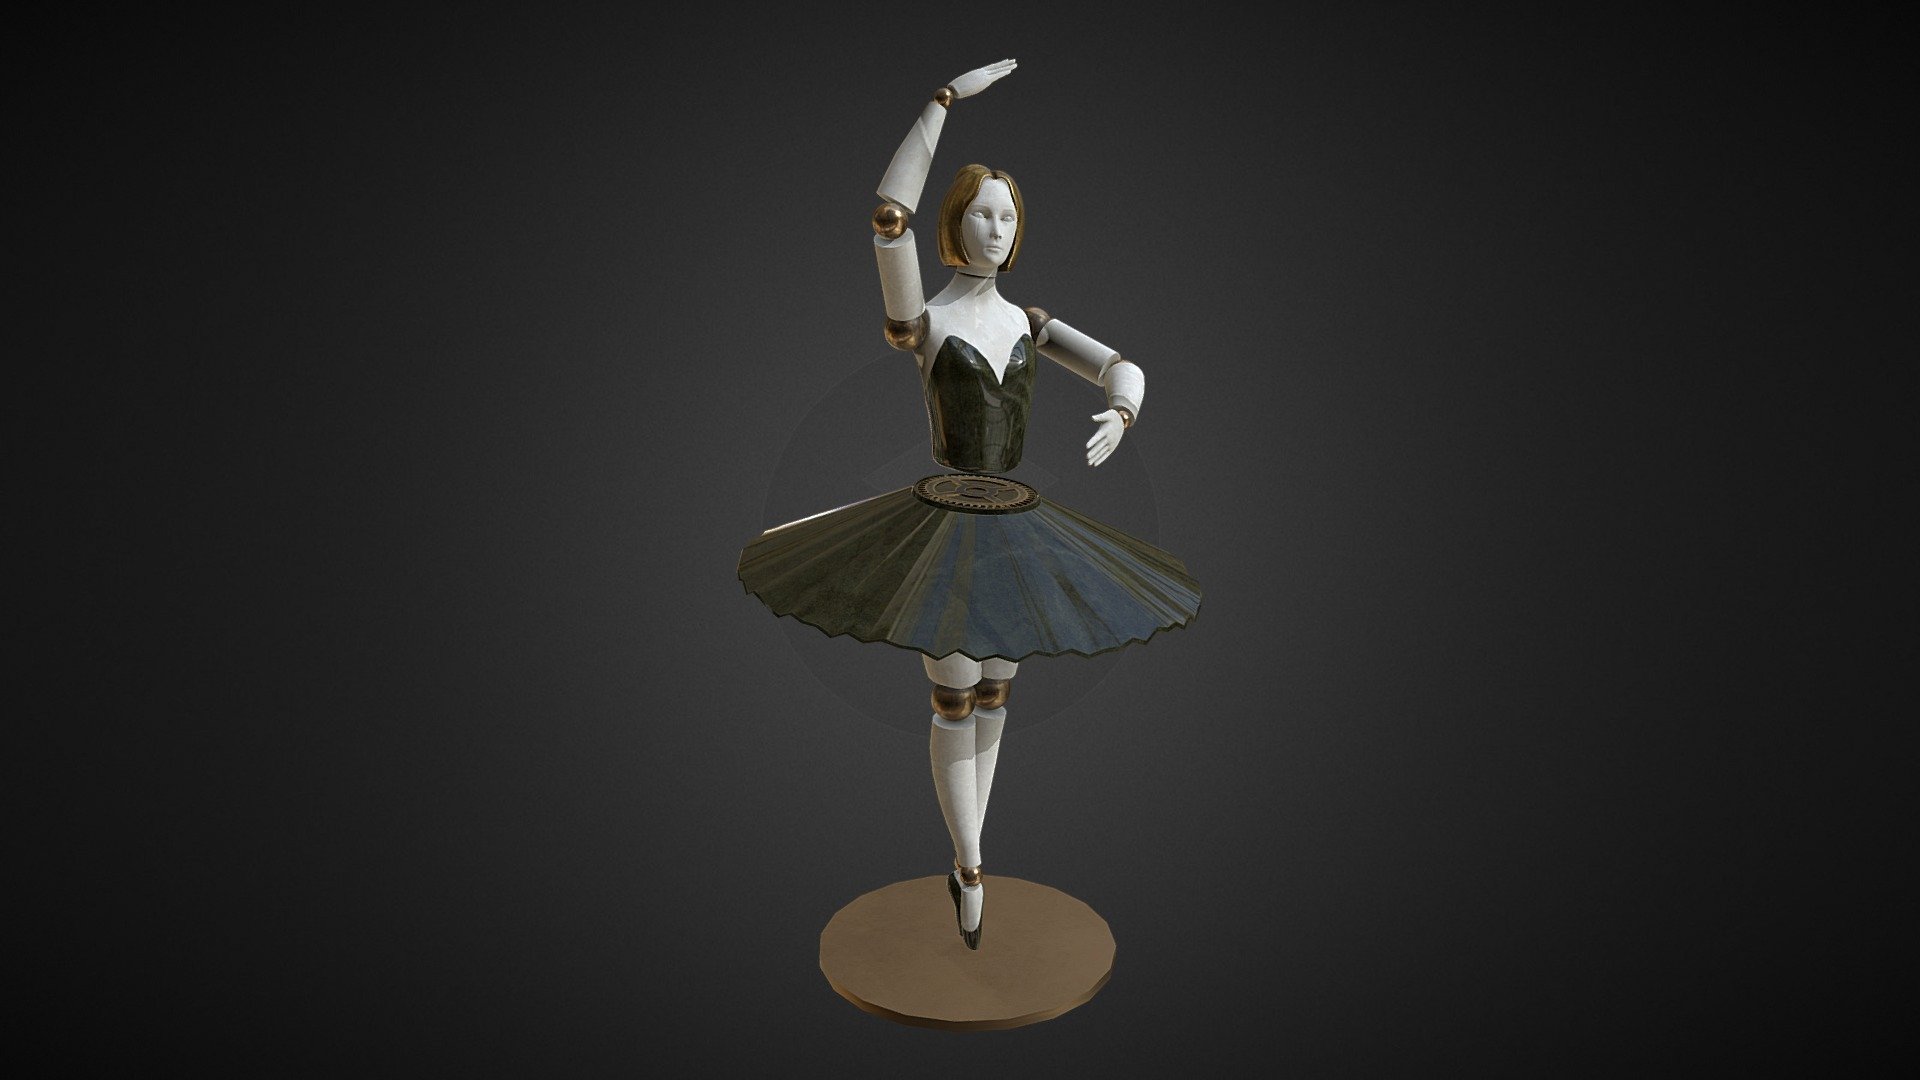 Ballerina character made for a Creature Creation/Advanced Modeling class. The original concept was based on Orianna from League of Legends and some Swan Lake/Ballerina themed fanarts of said character.

This character was a lot of fun to make and also very challenging. Sculpting and anatomy are not my strong suit which is why when forced to make a creature/character, I chose a more robotic, hard surface type of character. I am very happy with how she turned out and at some point I would maybe like to create a music box for her, as that was my original intention 3d model